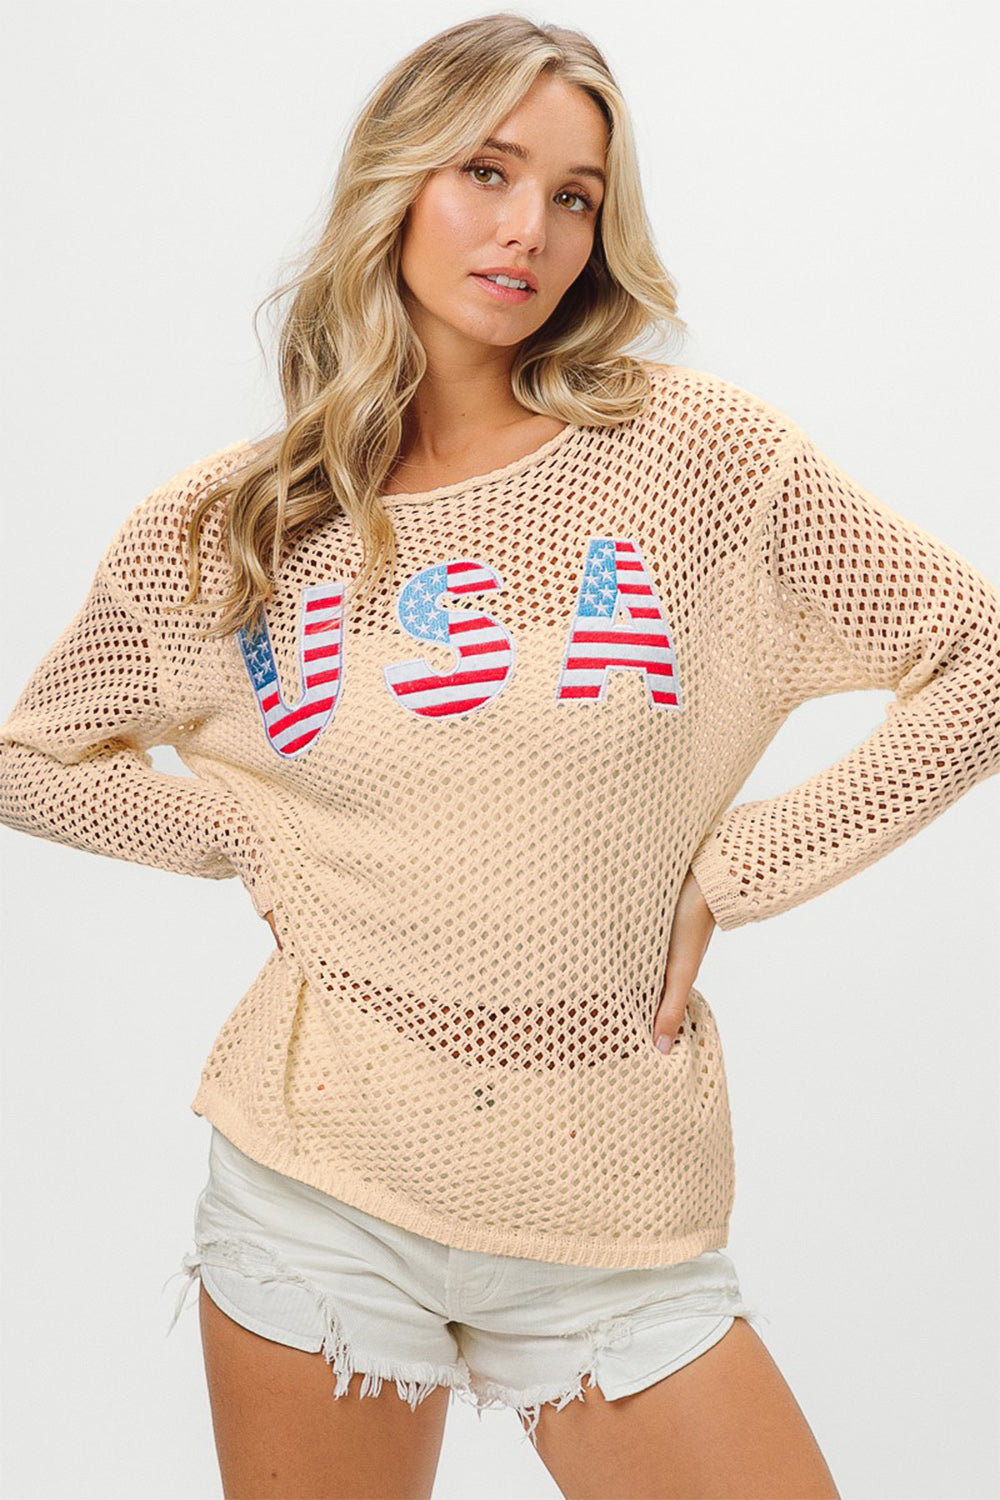 BiBi USA Embroidered Openwork Long Sleeves Knit Cover Up Top